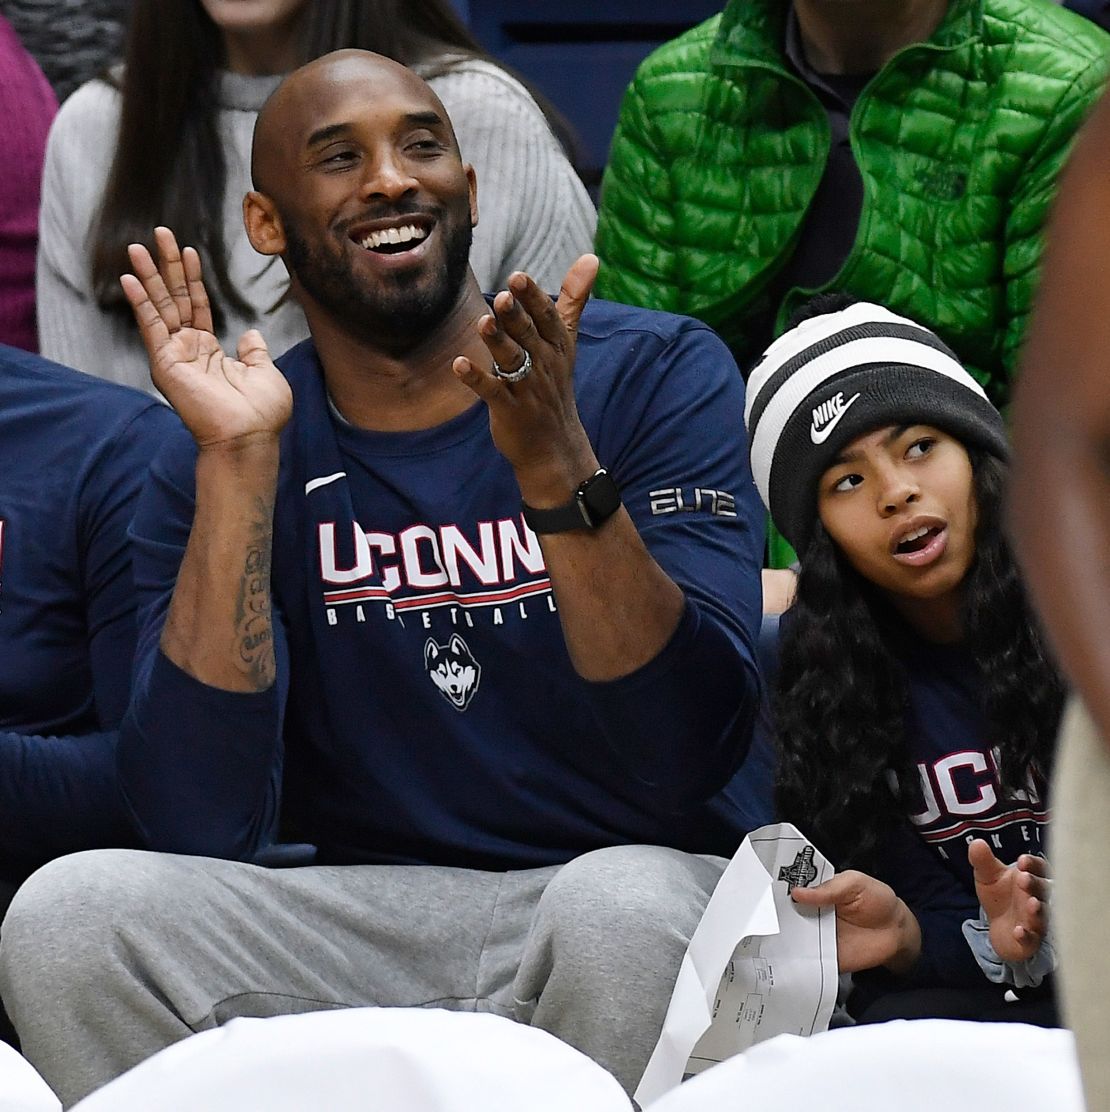 Kobe Bryant and his daughter Gianna watch the NCAA college basketball game between Connecticut and Houston on March 2.